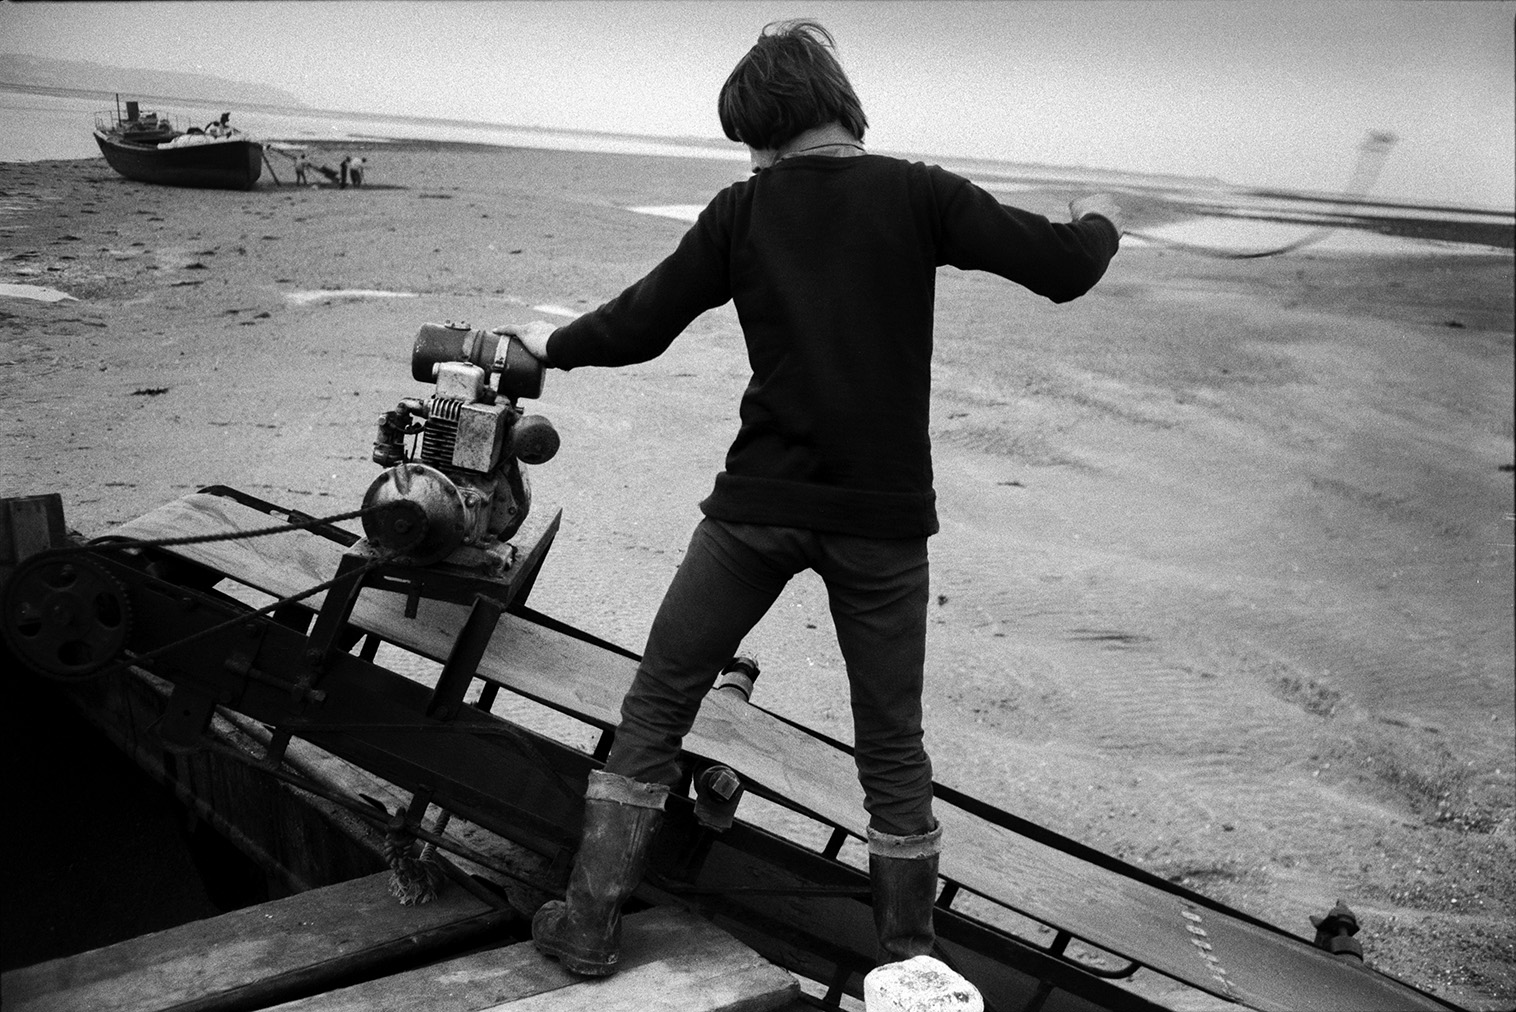 A man starting a conveyor belt or elevator on a sand barge at Crow Point, Braunton. Another barge can be seen in the background.